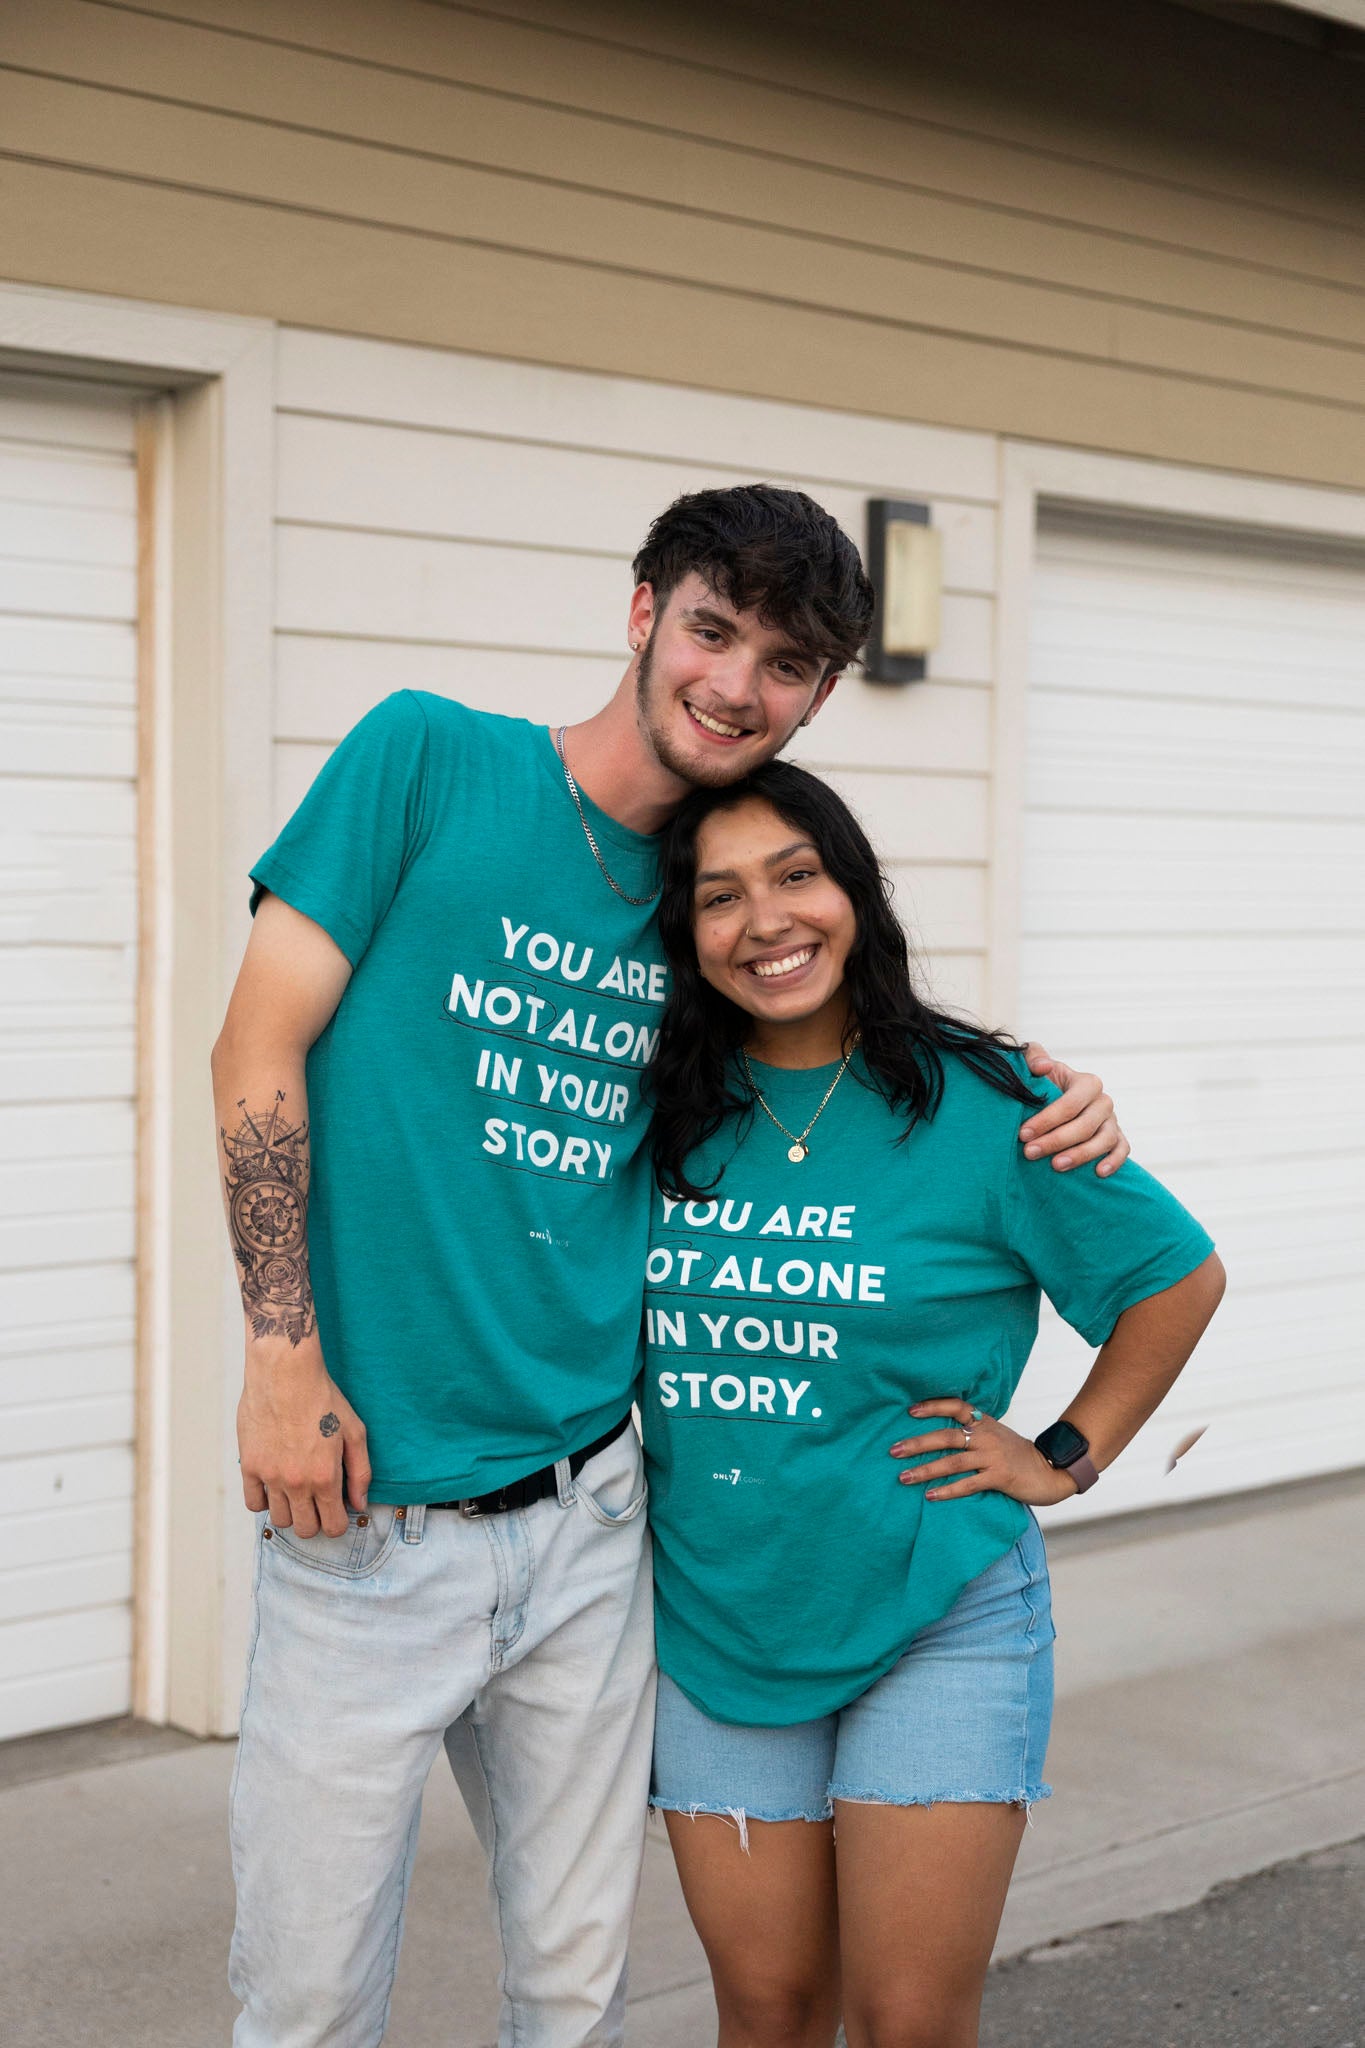 Not Alone In Your Story: Teal - Only7Seconds Shop